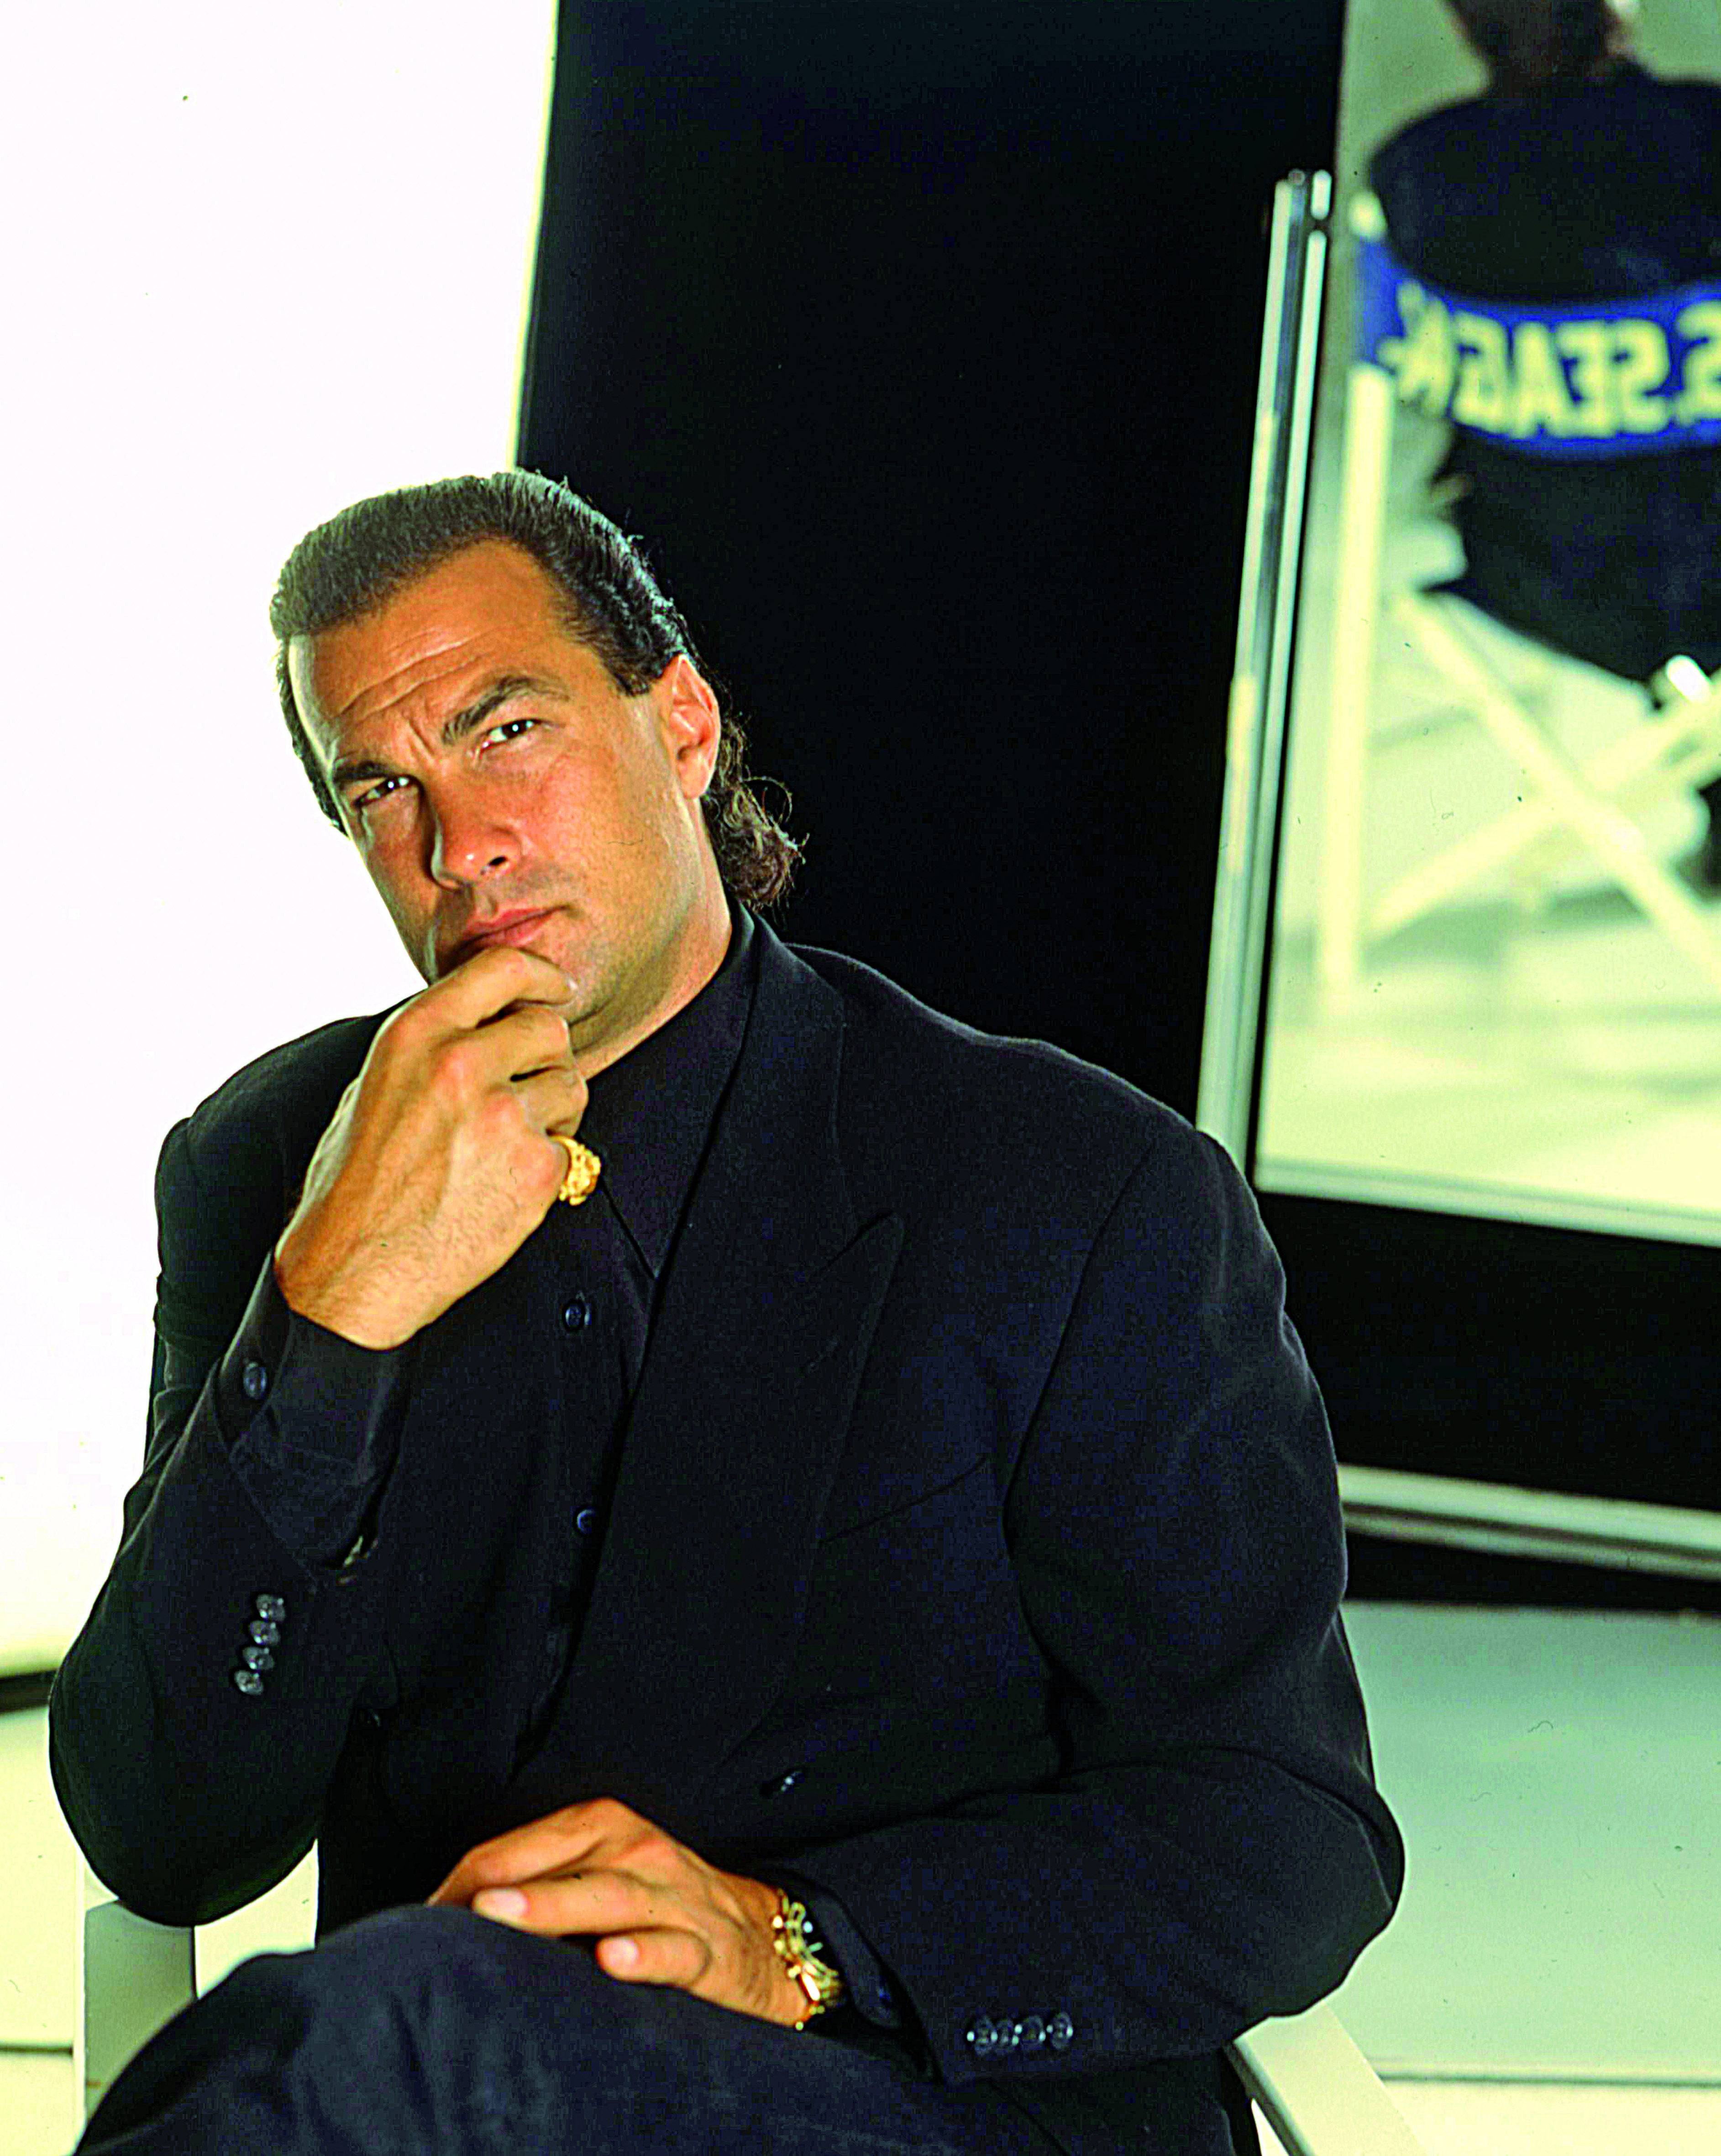 Actor and screenwriter Steven Seagal posing while resting his hand on his chin, wearing a black suit on May 8, 1995 in Milan. / Source: Getty Images